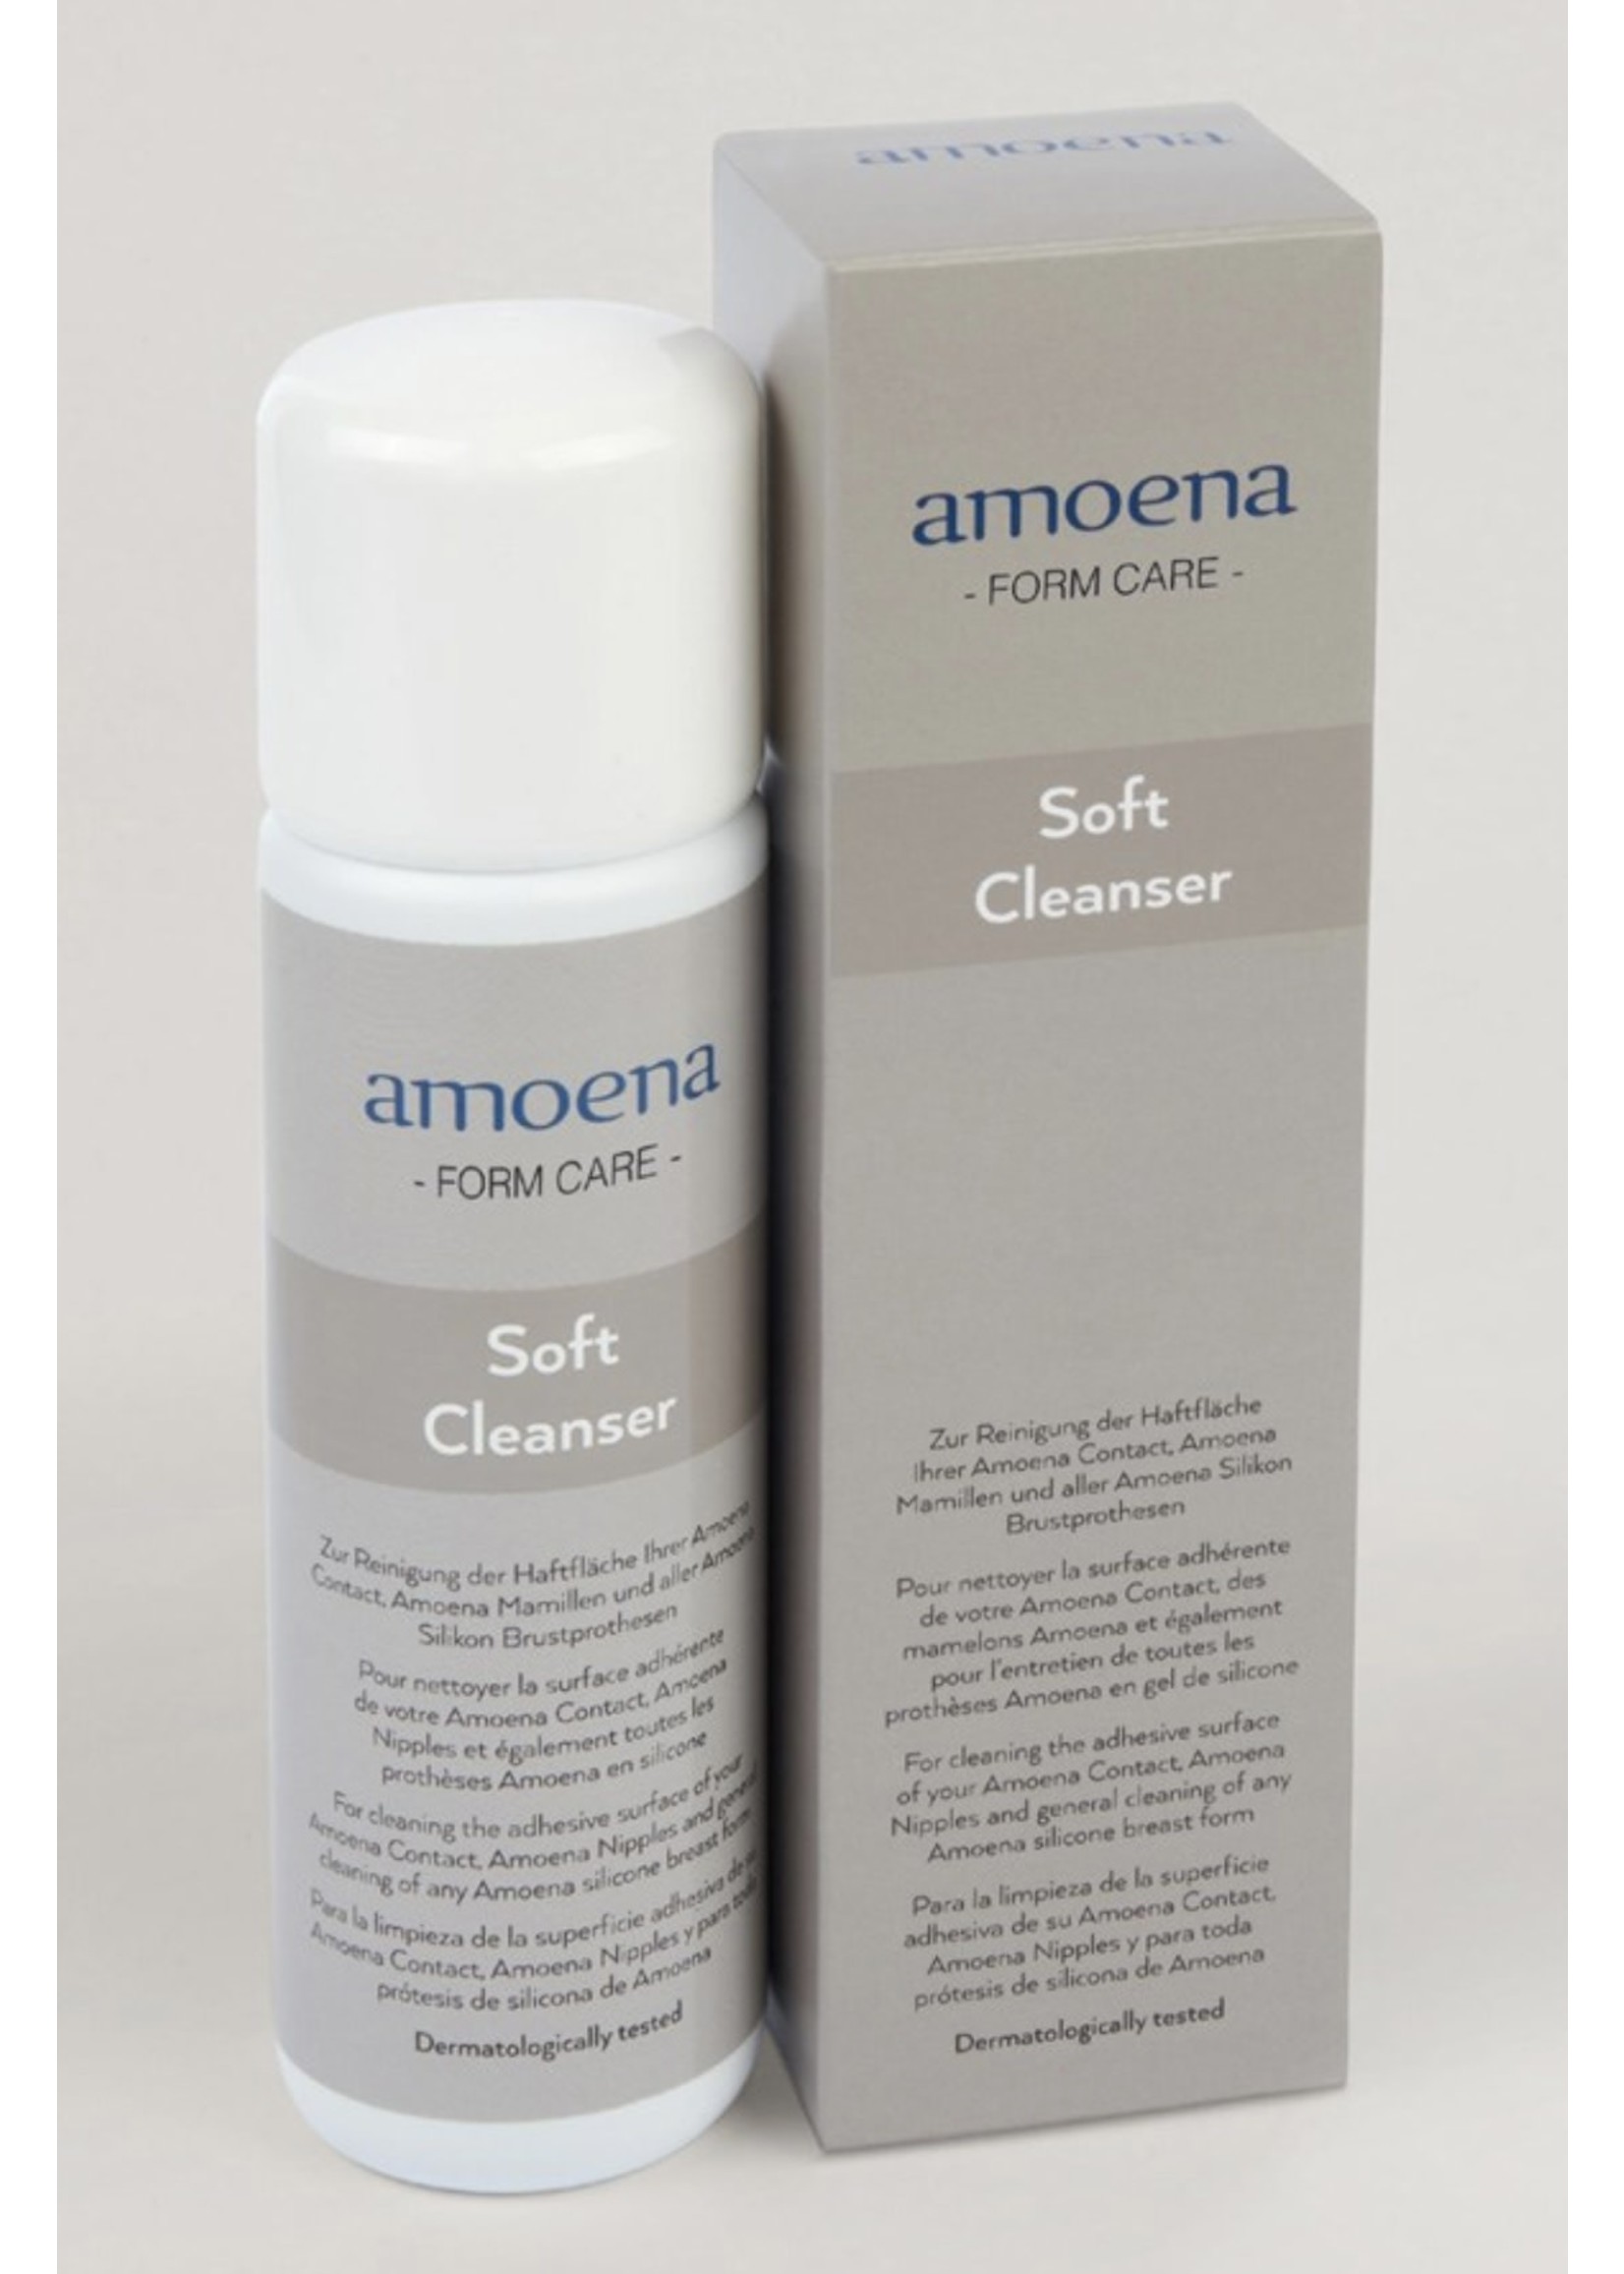 Soft Cleanser for breast forms